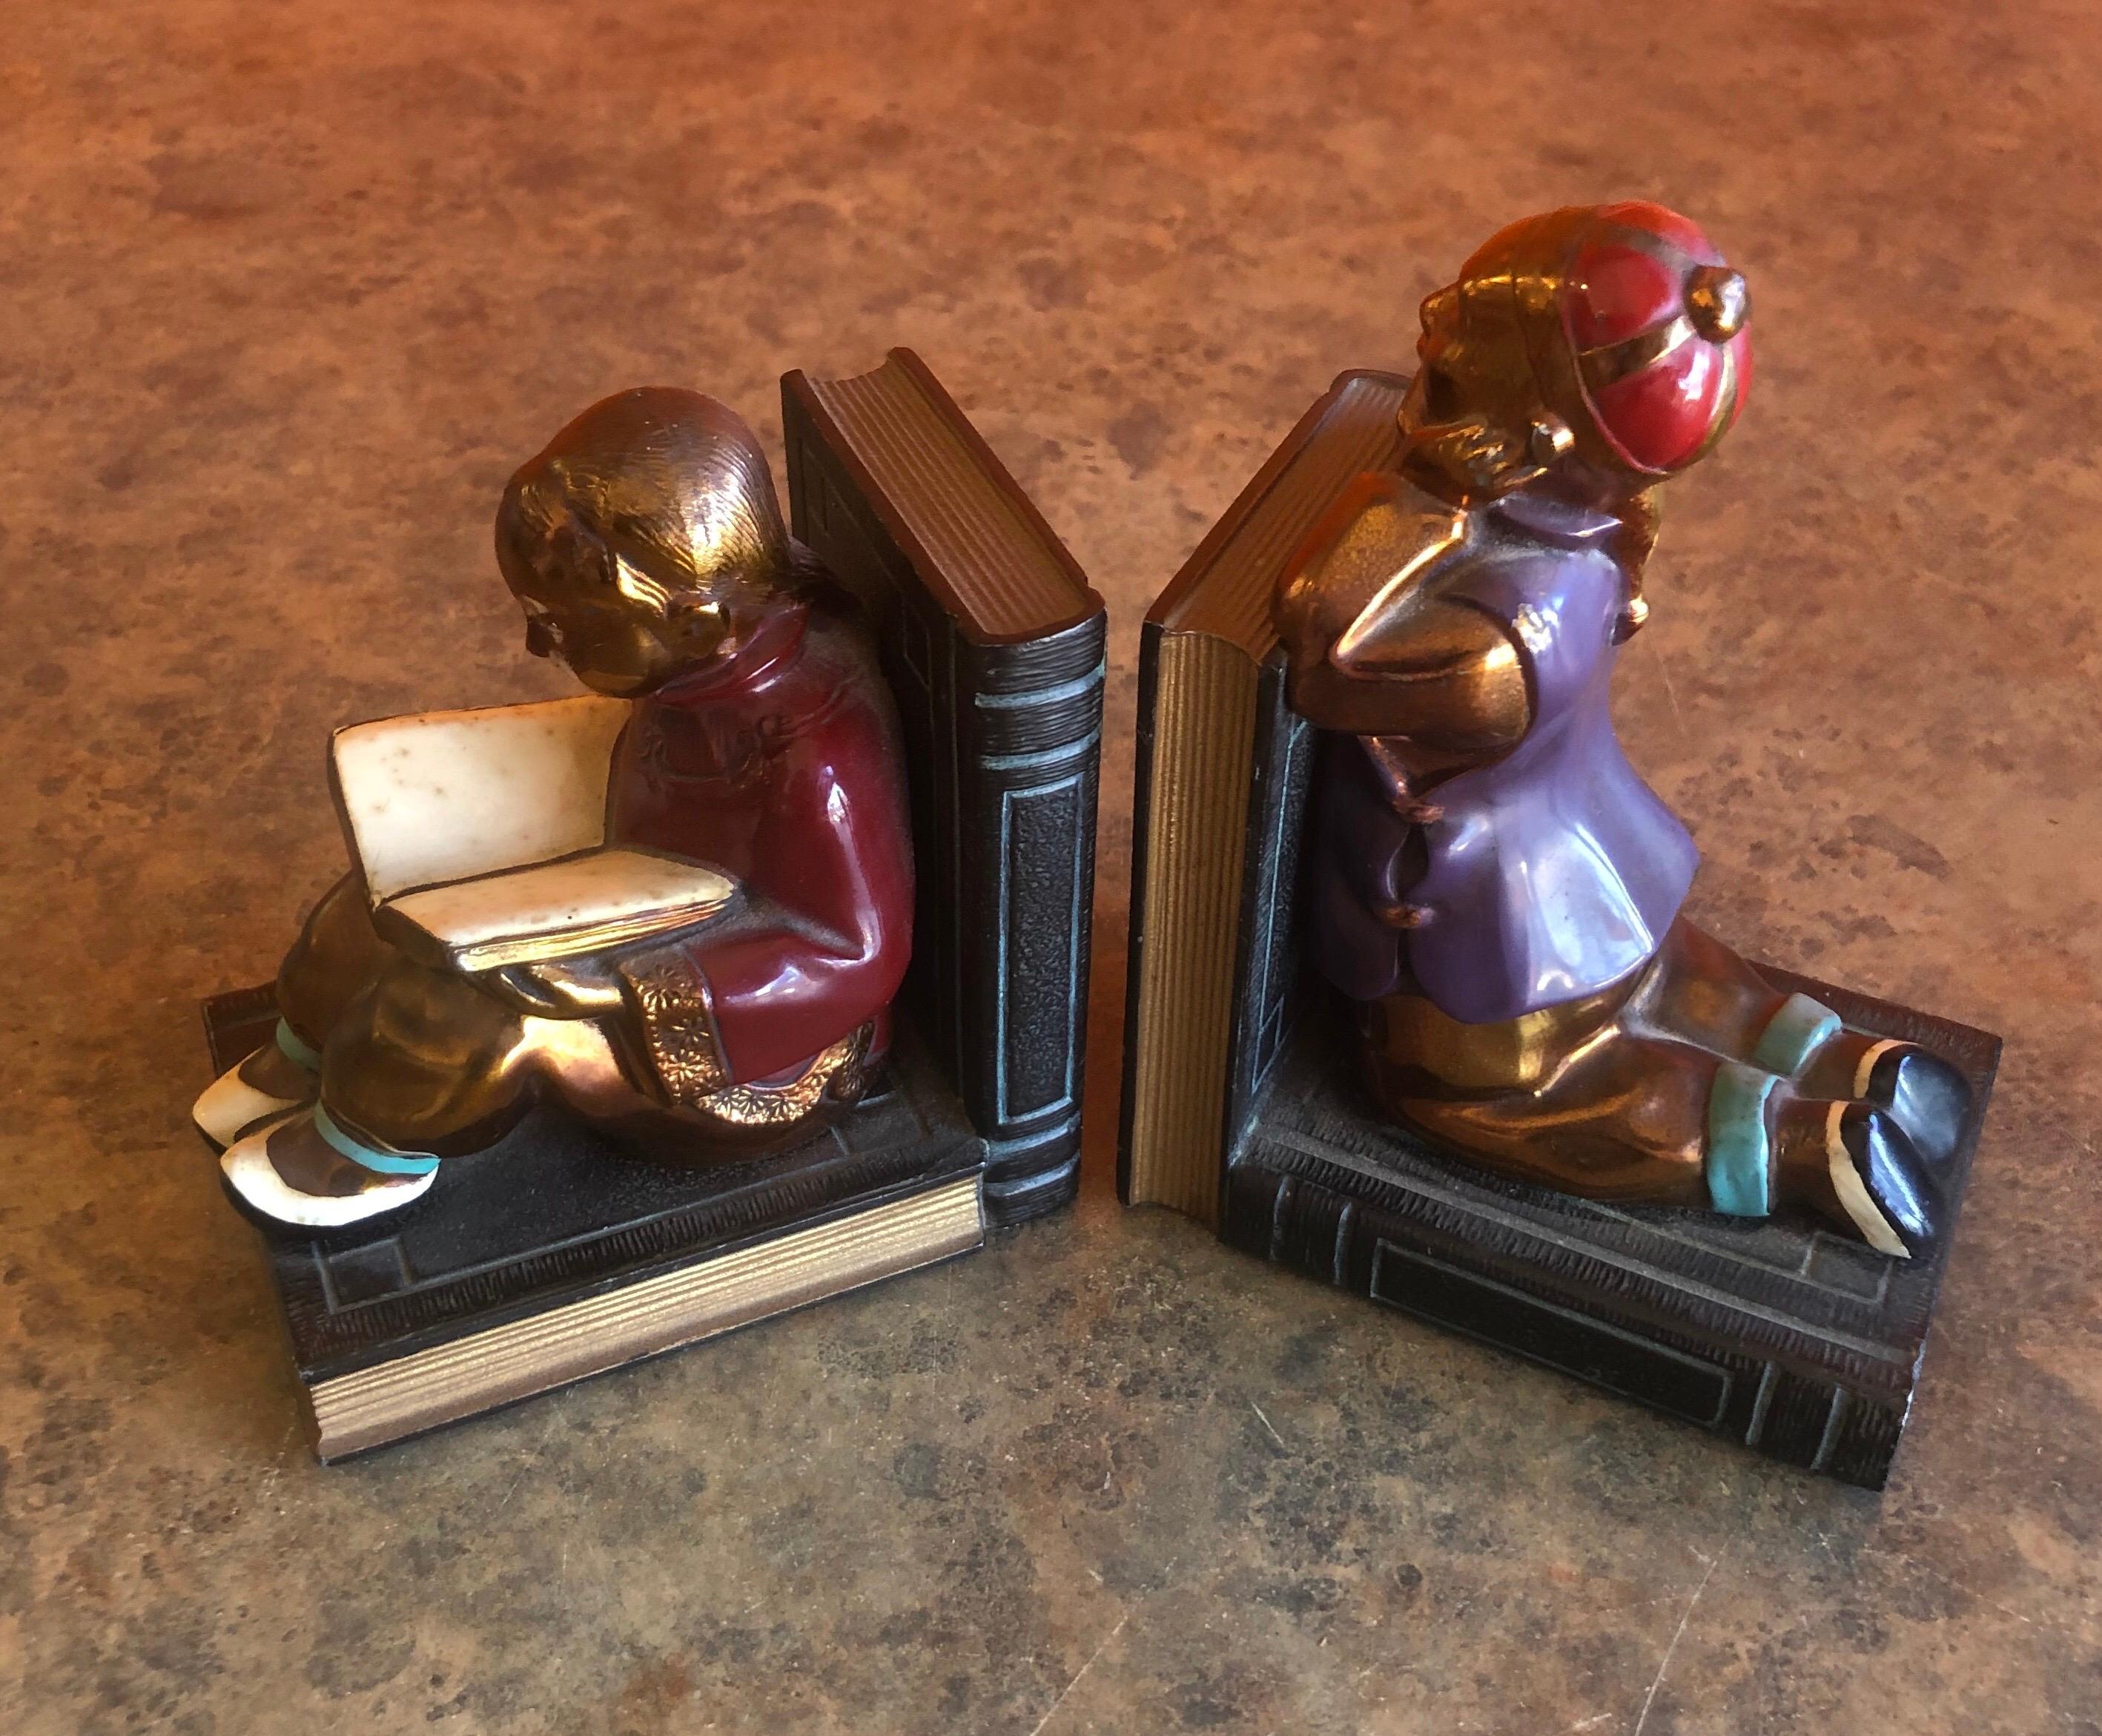 Fabulous pair of metal clad Art Deco bookends by Ronson Art Metal Works, circa 1930s. The bookends depict two Chinese youngsters, beautifully sculpted; the boy is patiently observing while the girl is quietly absorbed by what she reads.

This